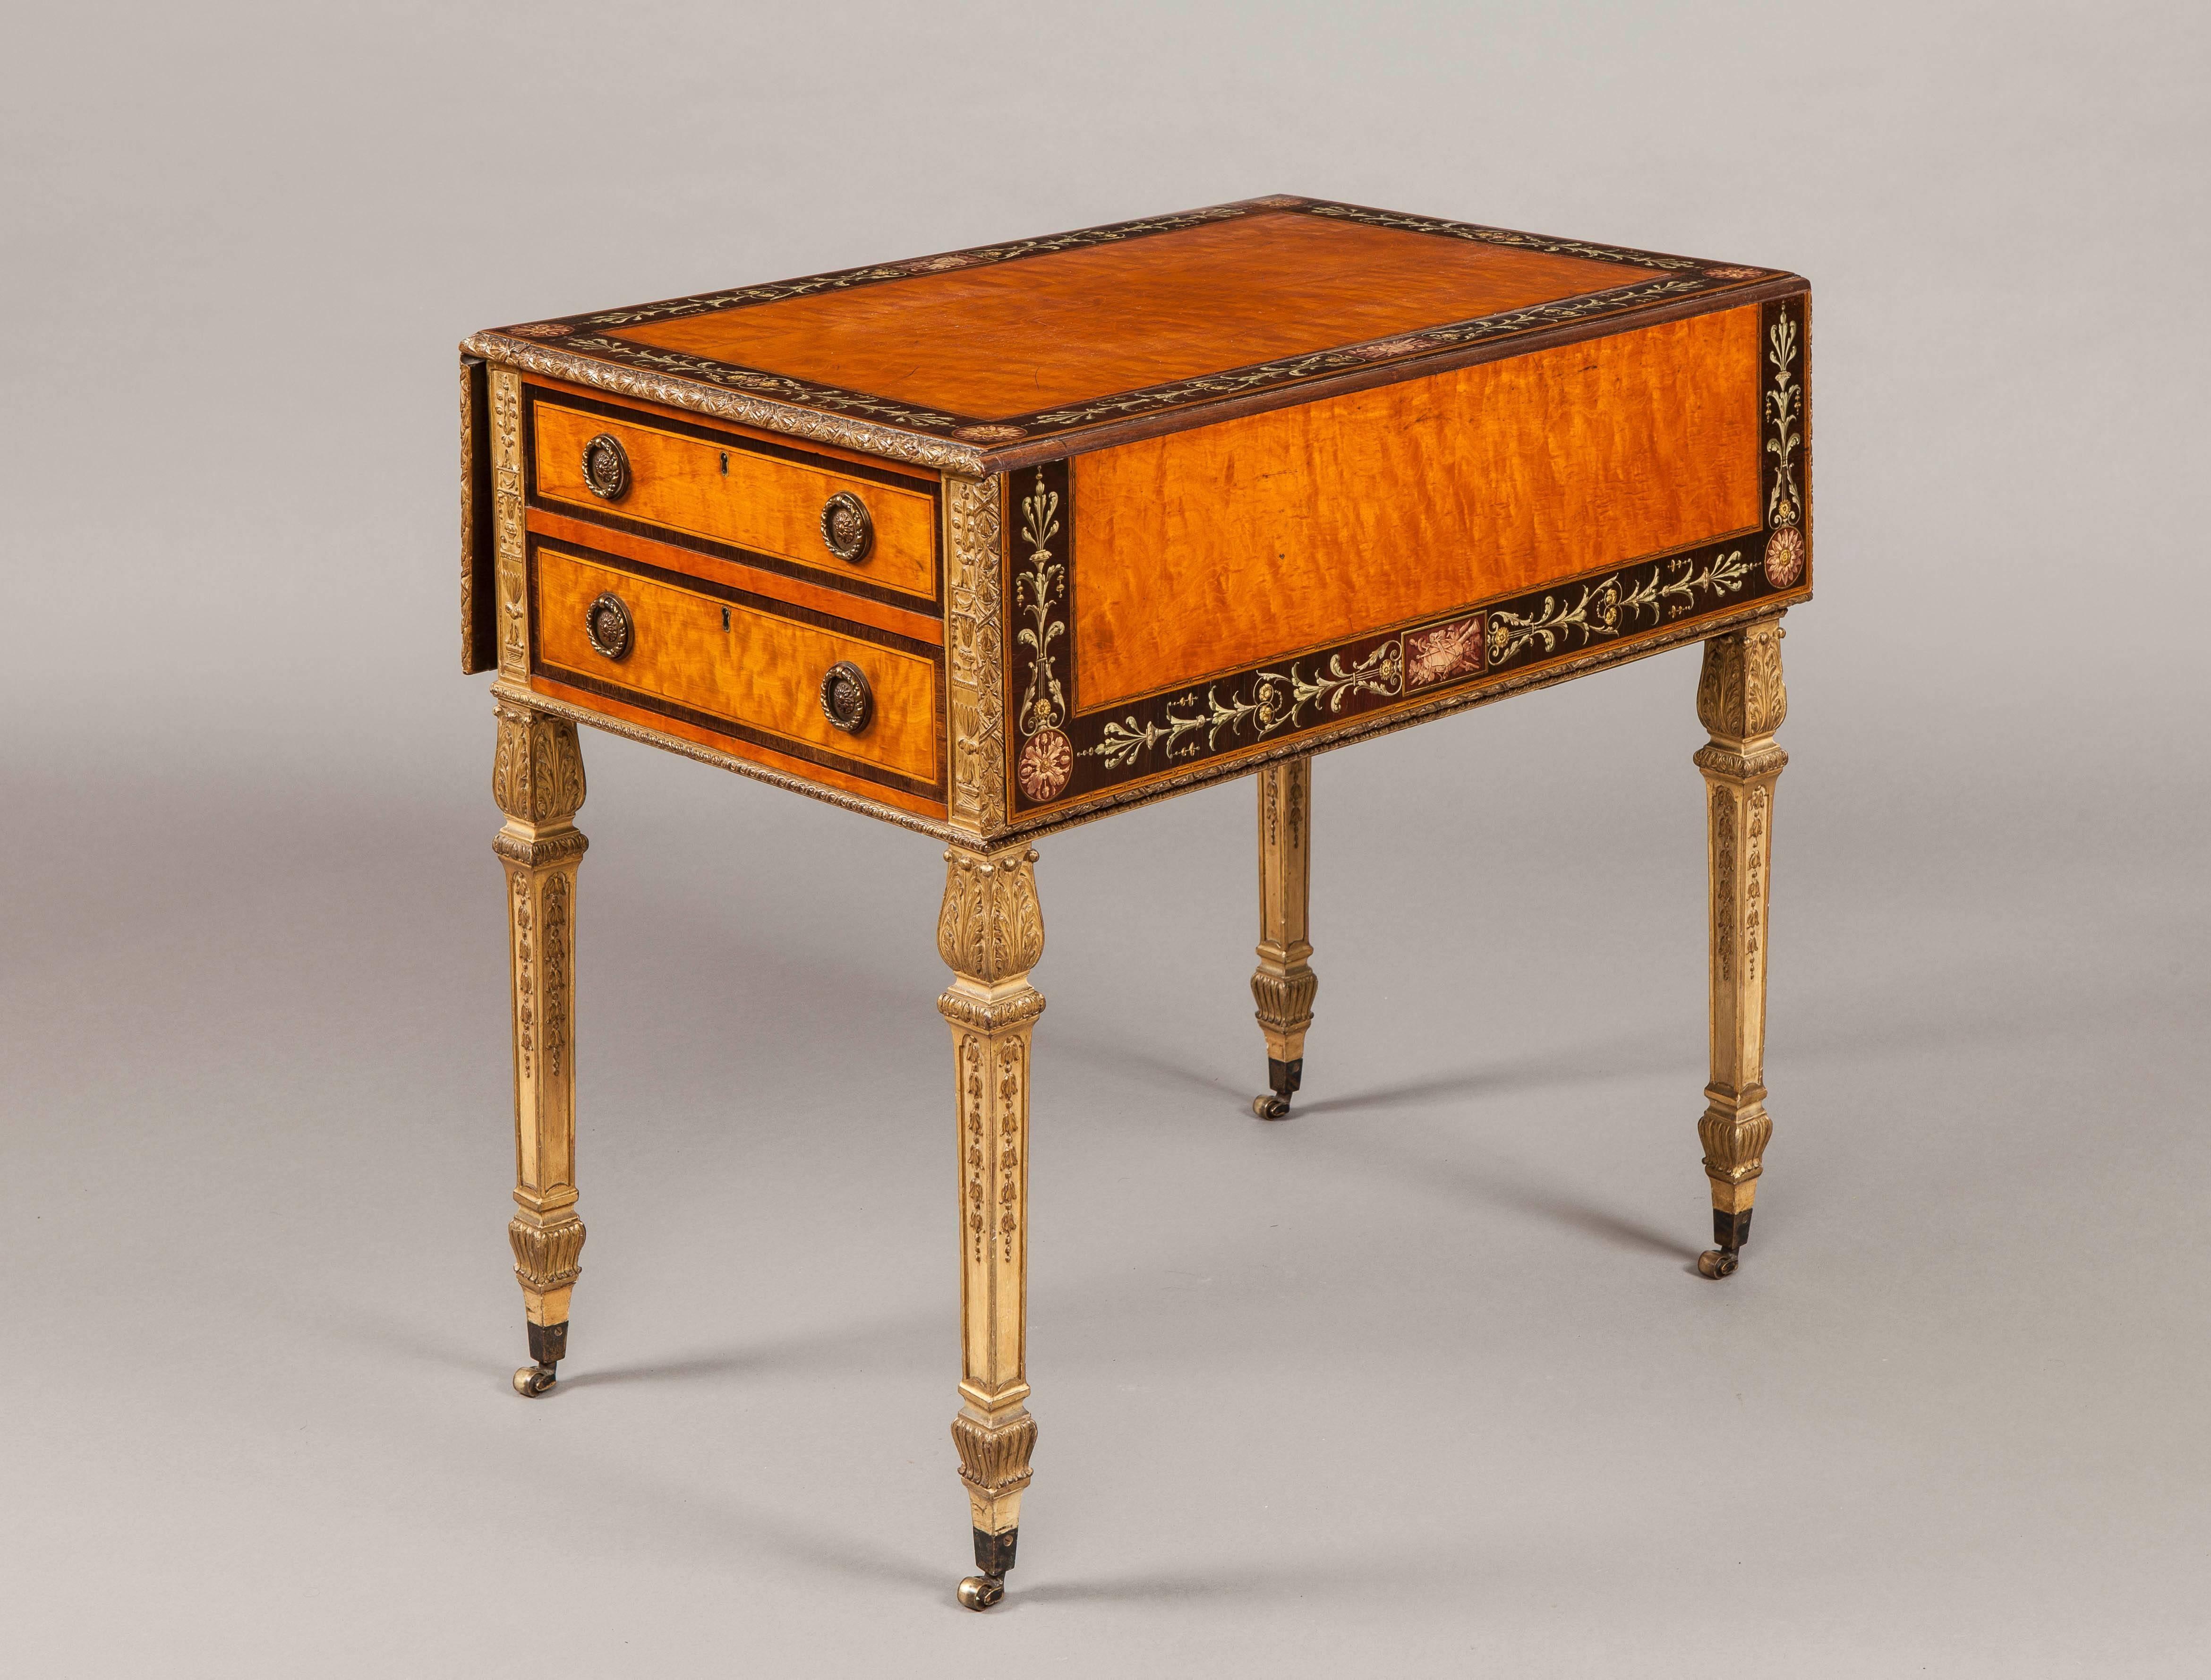 A Wonderful Pembroke ‘Harlequin’ Table after an Original Sheraton Design, Attributed to Wright and Mansfield

Constructed in satinwood, with amaranth cross banding, enhanced with Tunbridgeware geometric stringing in boxwood and green stained